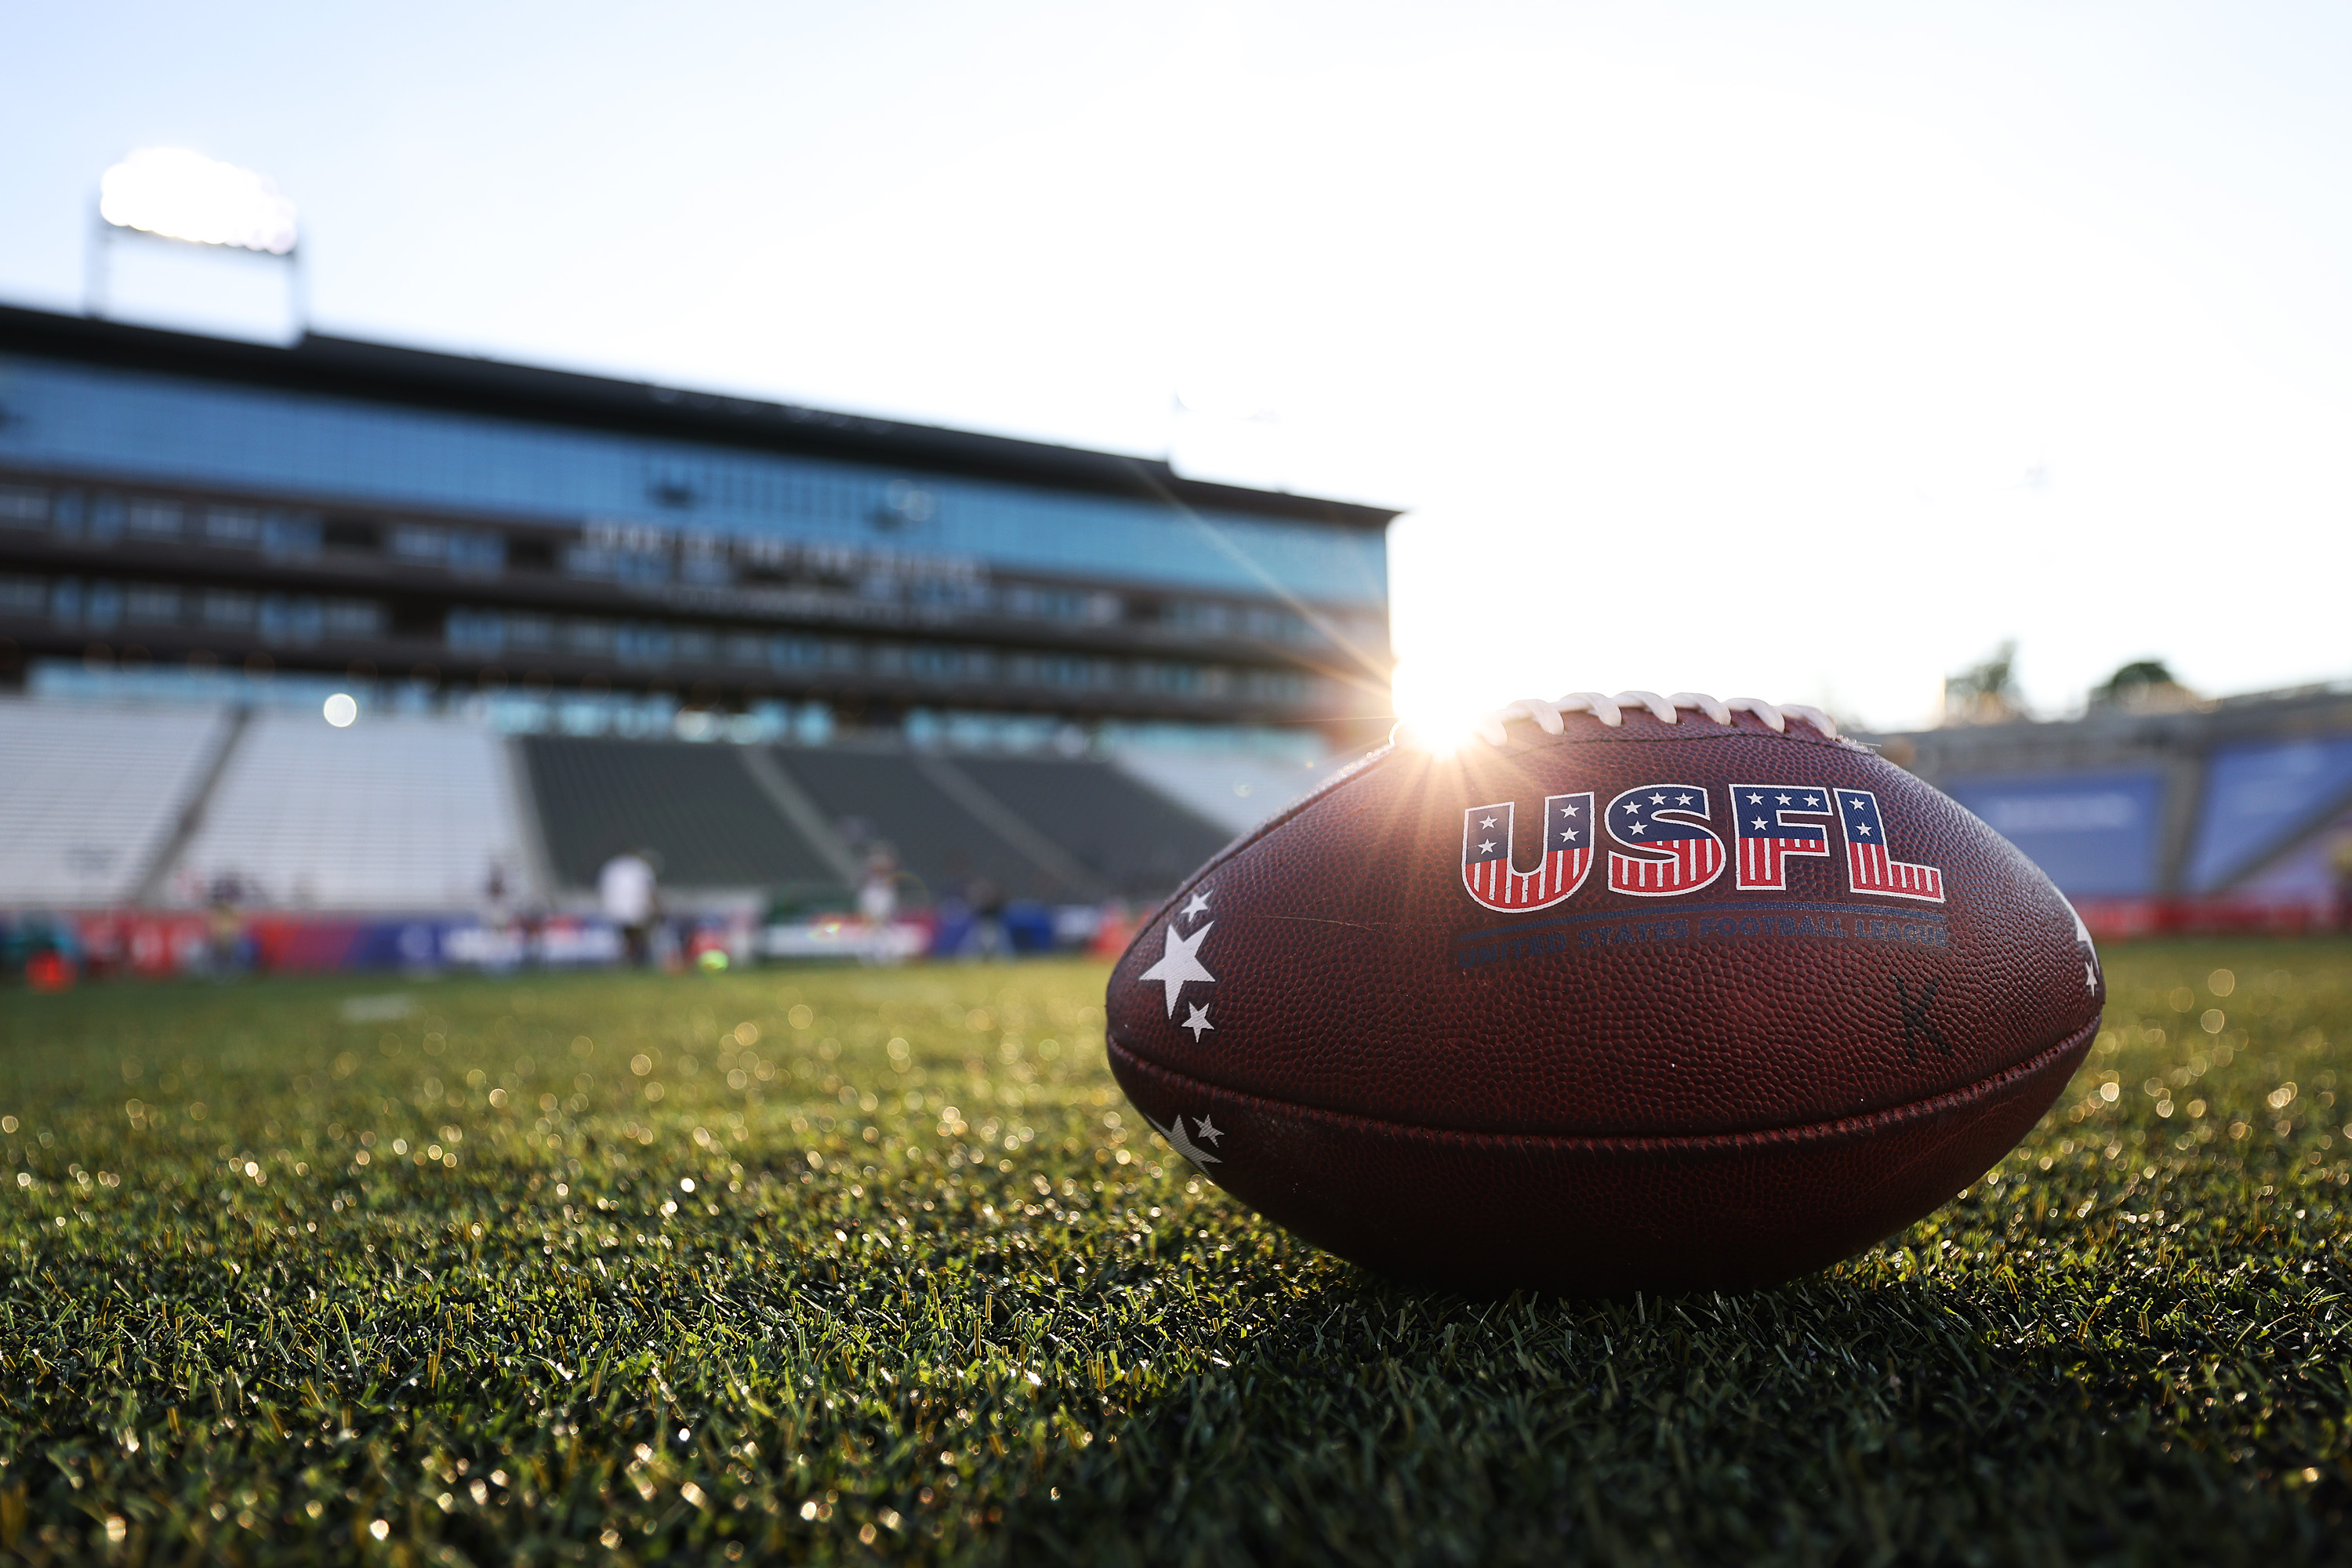 The USFL logo is seen on a football during warm ups before the game between the New Orleans Breakers and the Michigan Panthers at Protective Stadium on May 28, 2022 in Birmingham, Alabama.